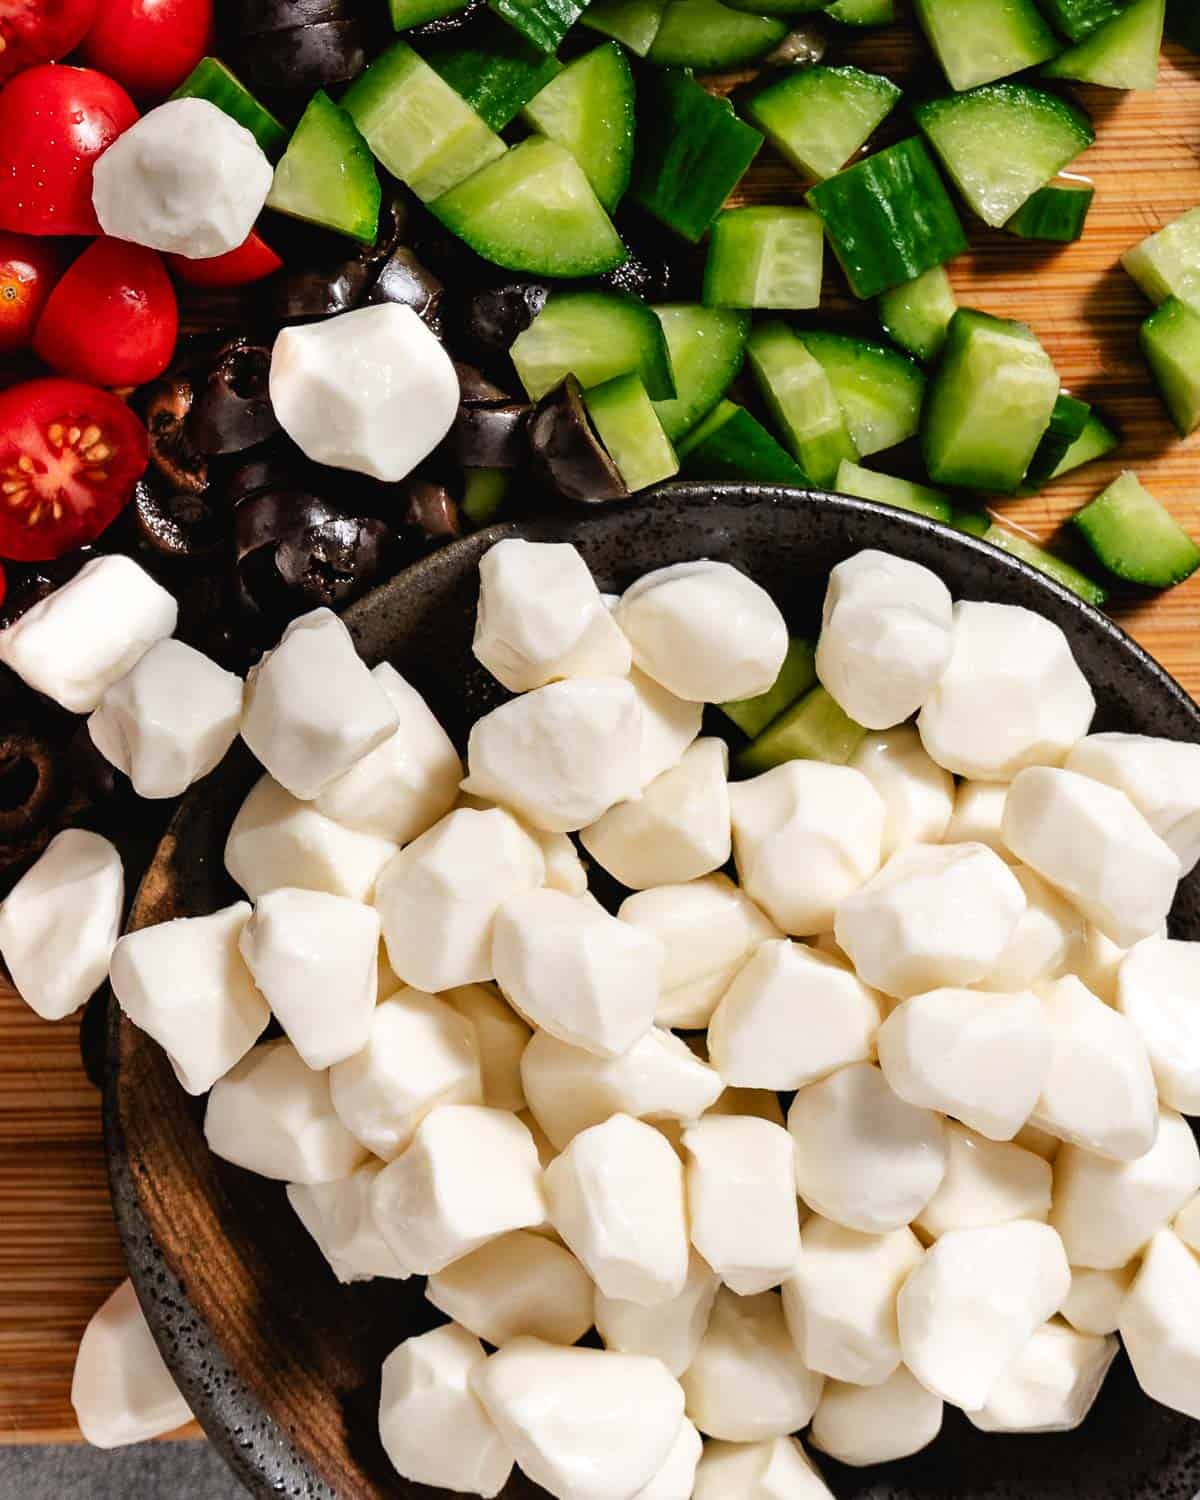 Tiny mozzarella balls with tomatoes and cucumbers in a black bowl.